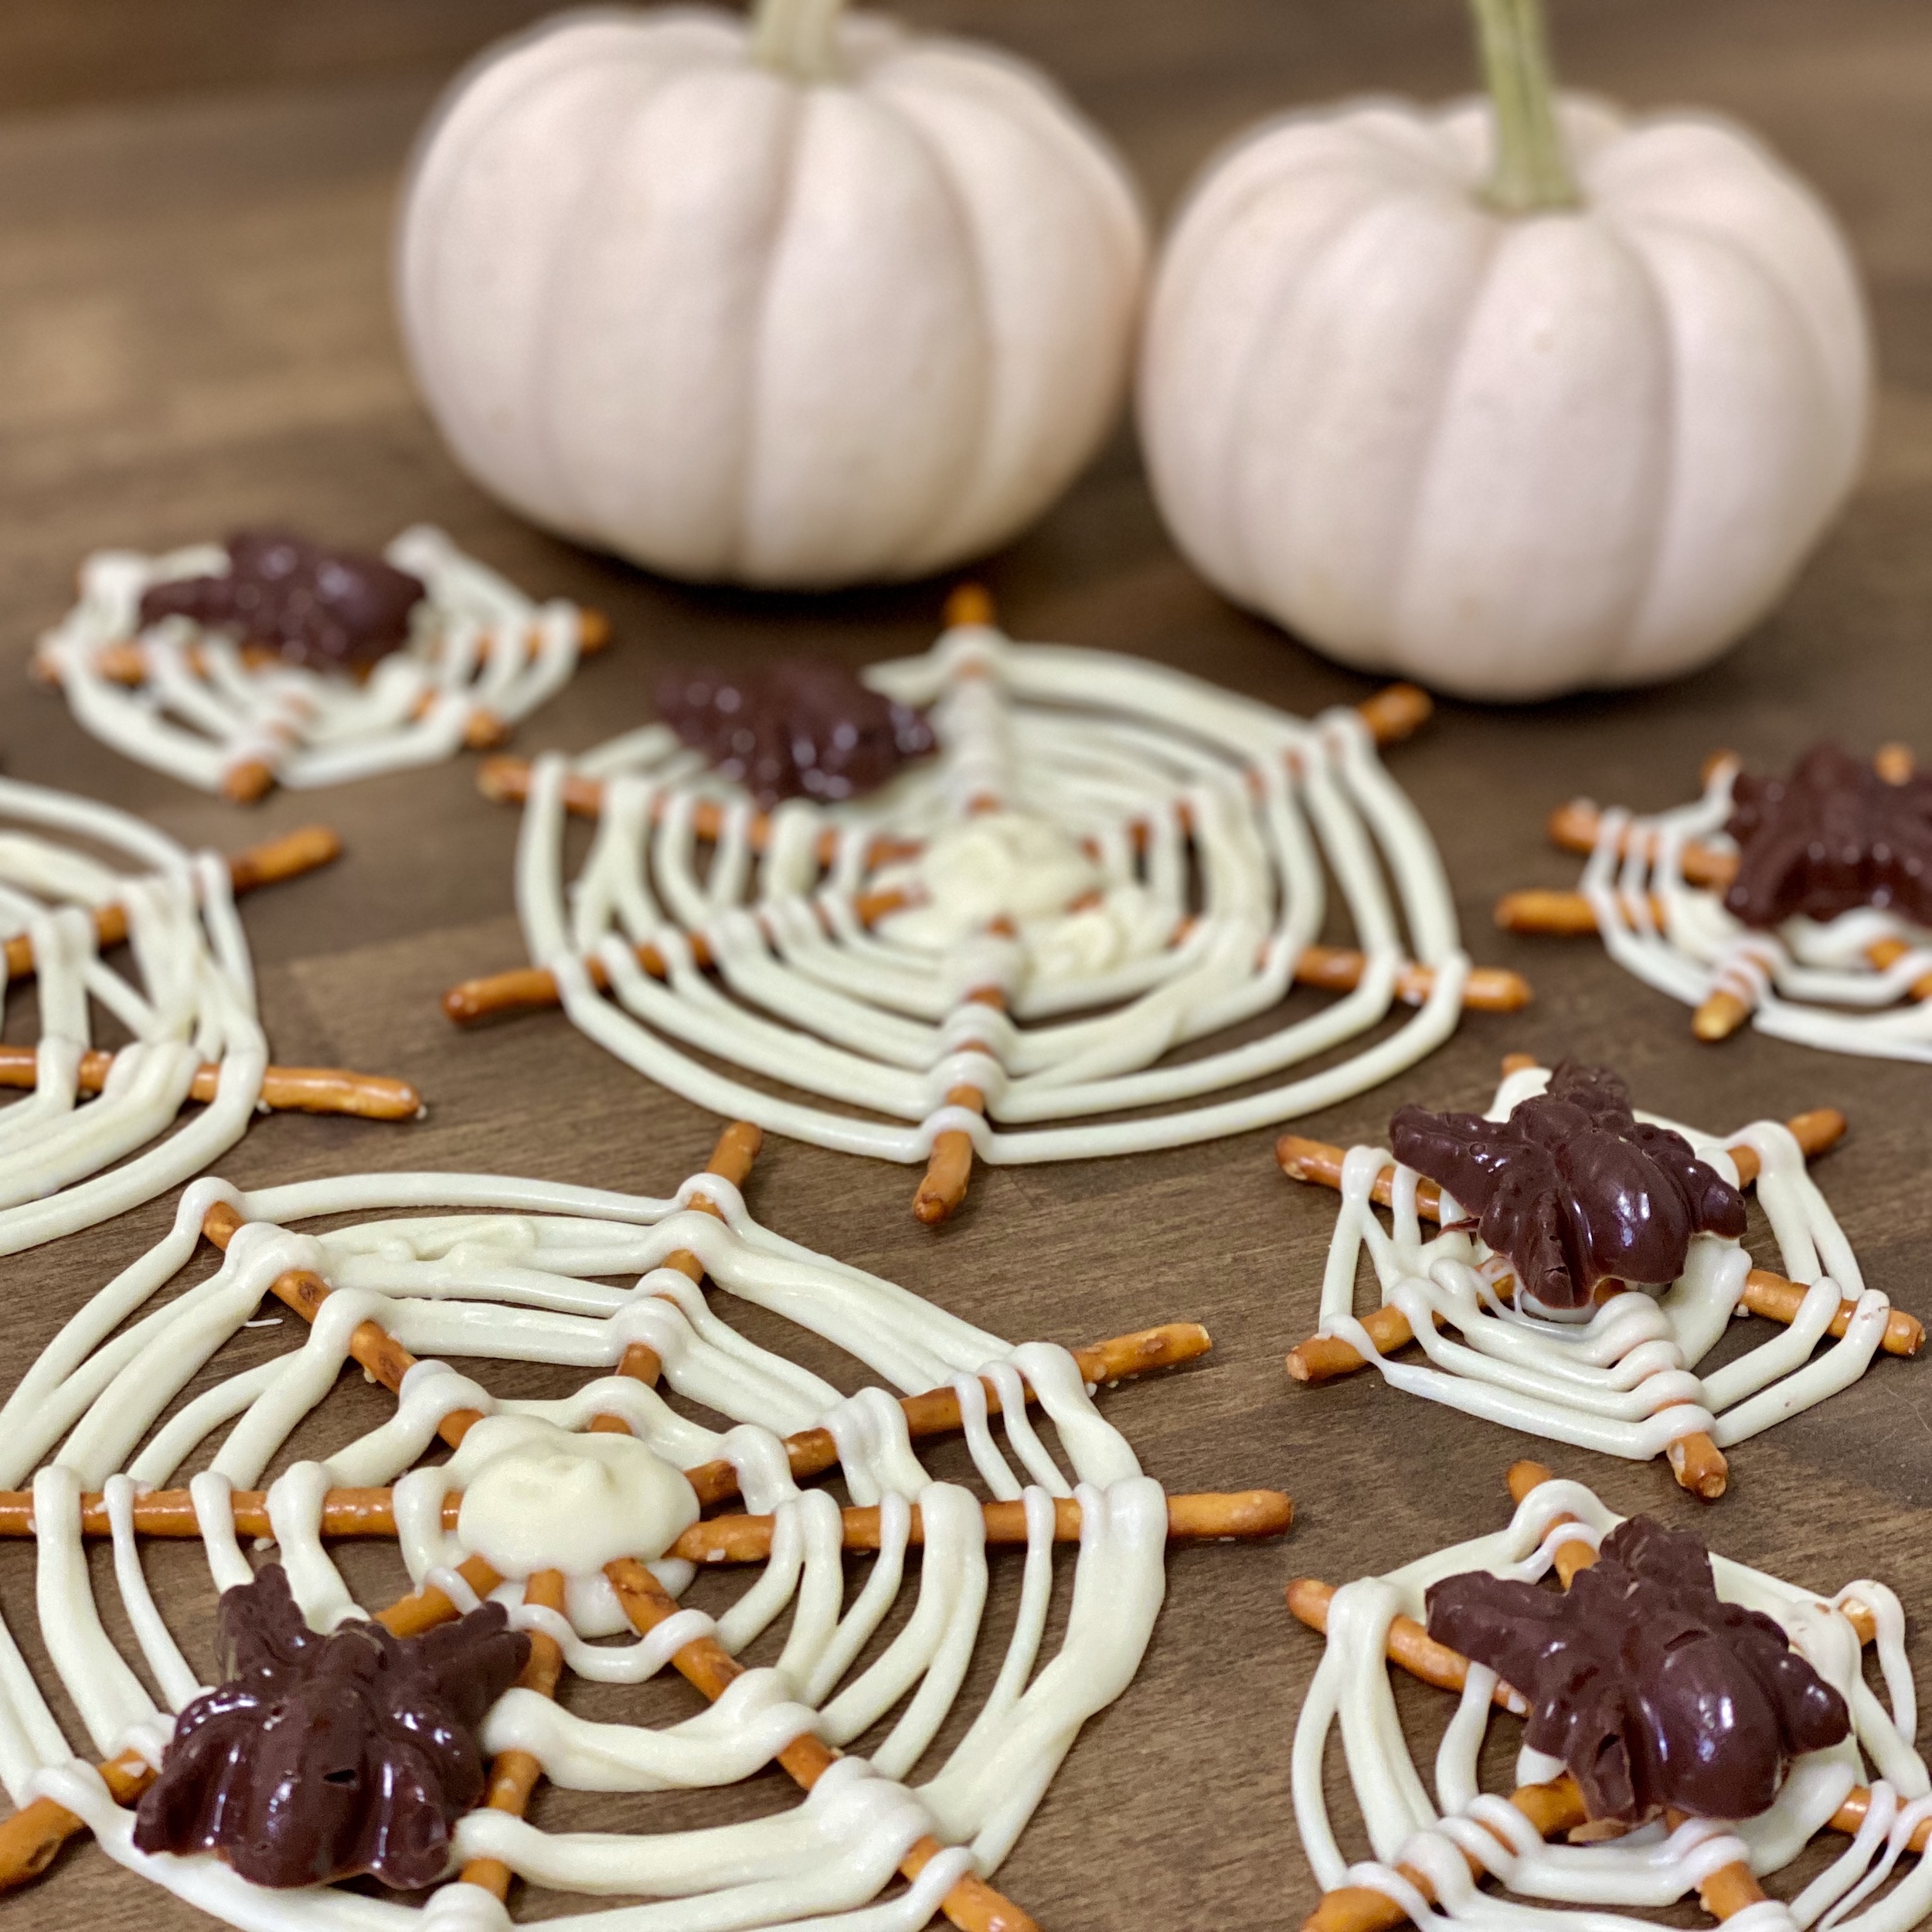 Candy spider webs made from pretzels and chocolate.